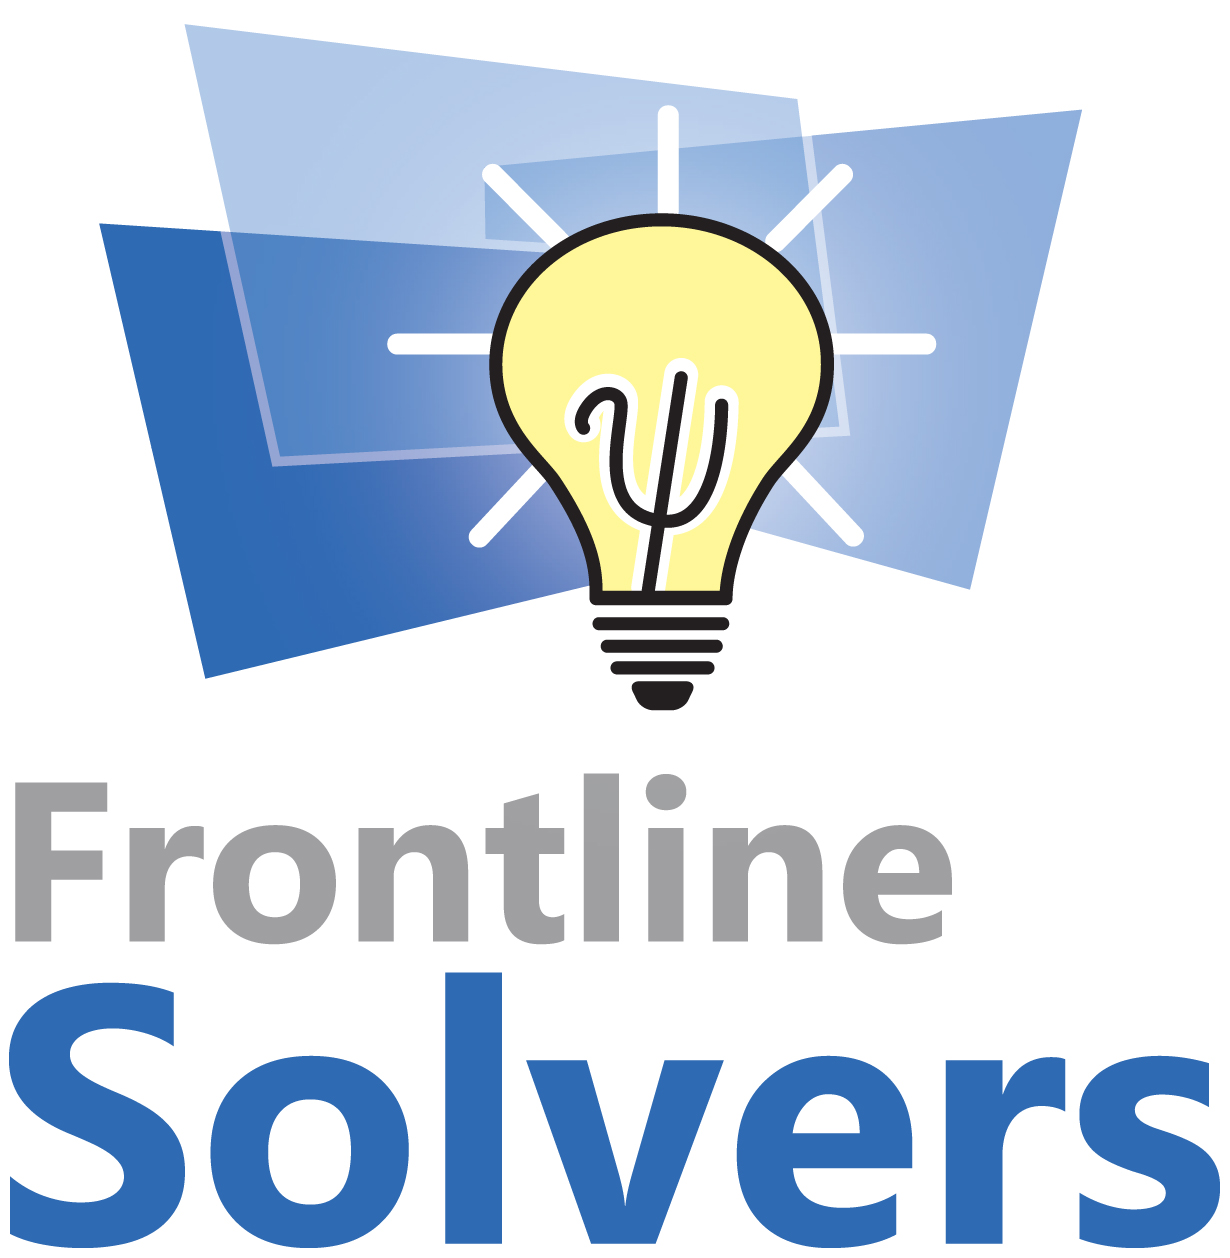 Frontline Systems Inc.